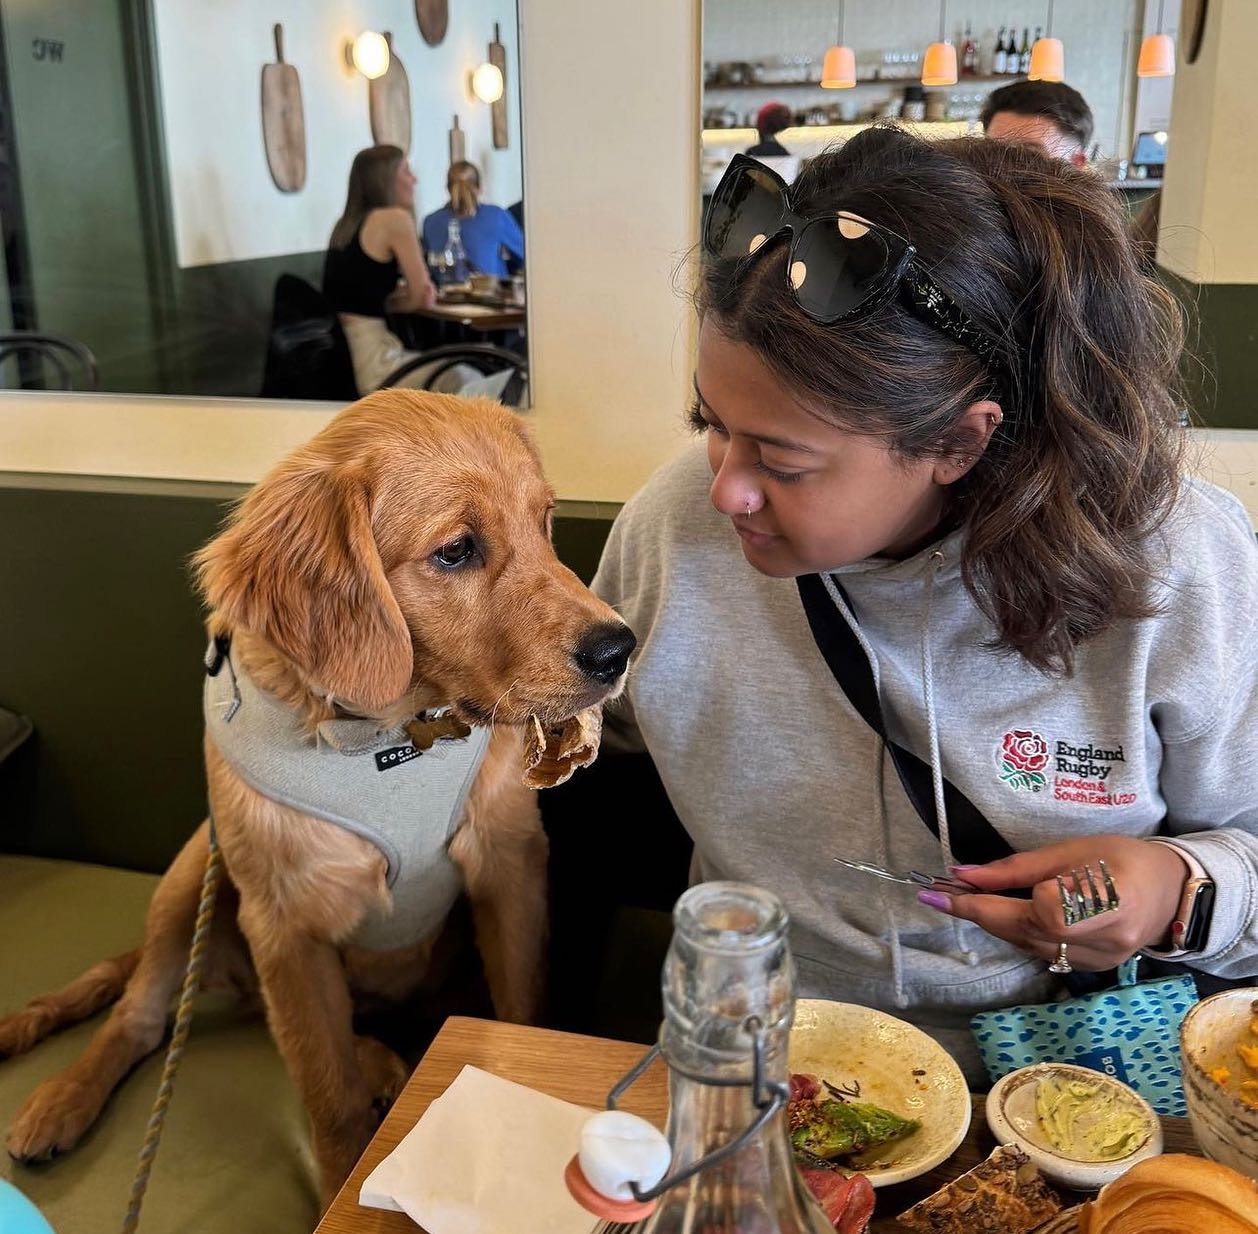 Lunch dates are better with your best furry friend by your side! 🐶🍽️

📸: @sonny_the_goldenboy 
#clapham #willows #dog #doglovers #claphamcommon